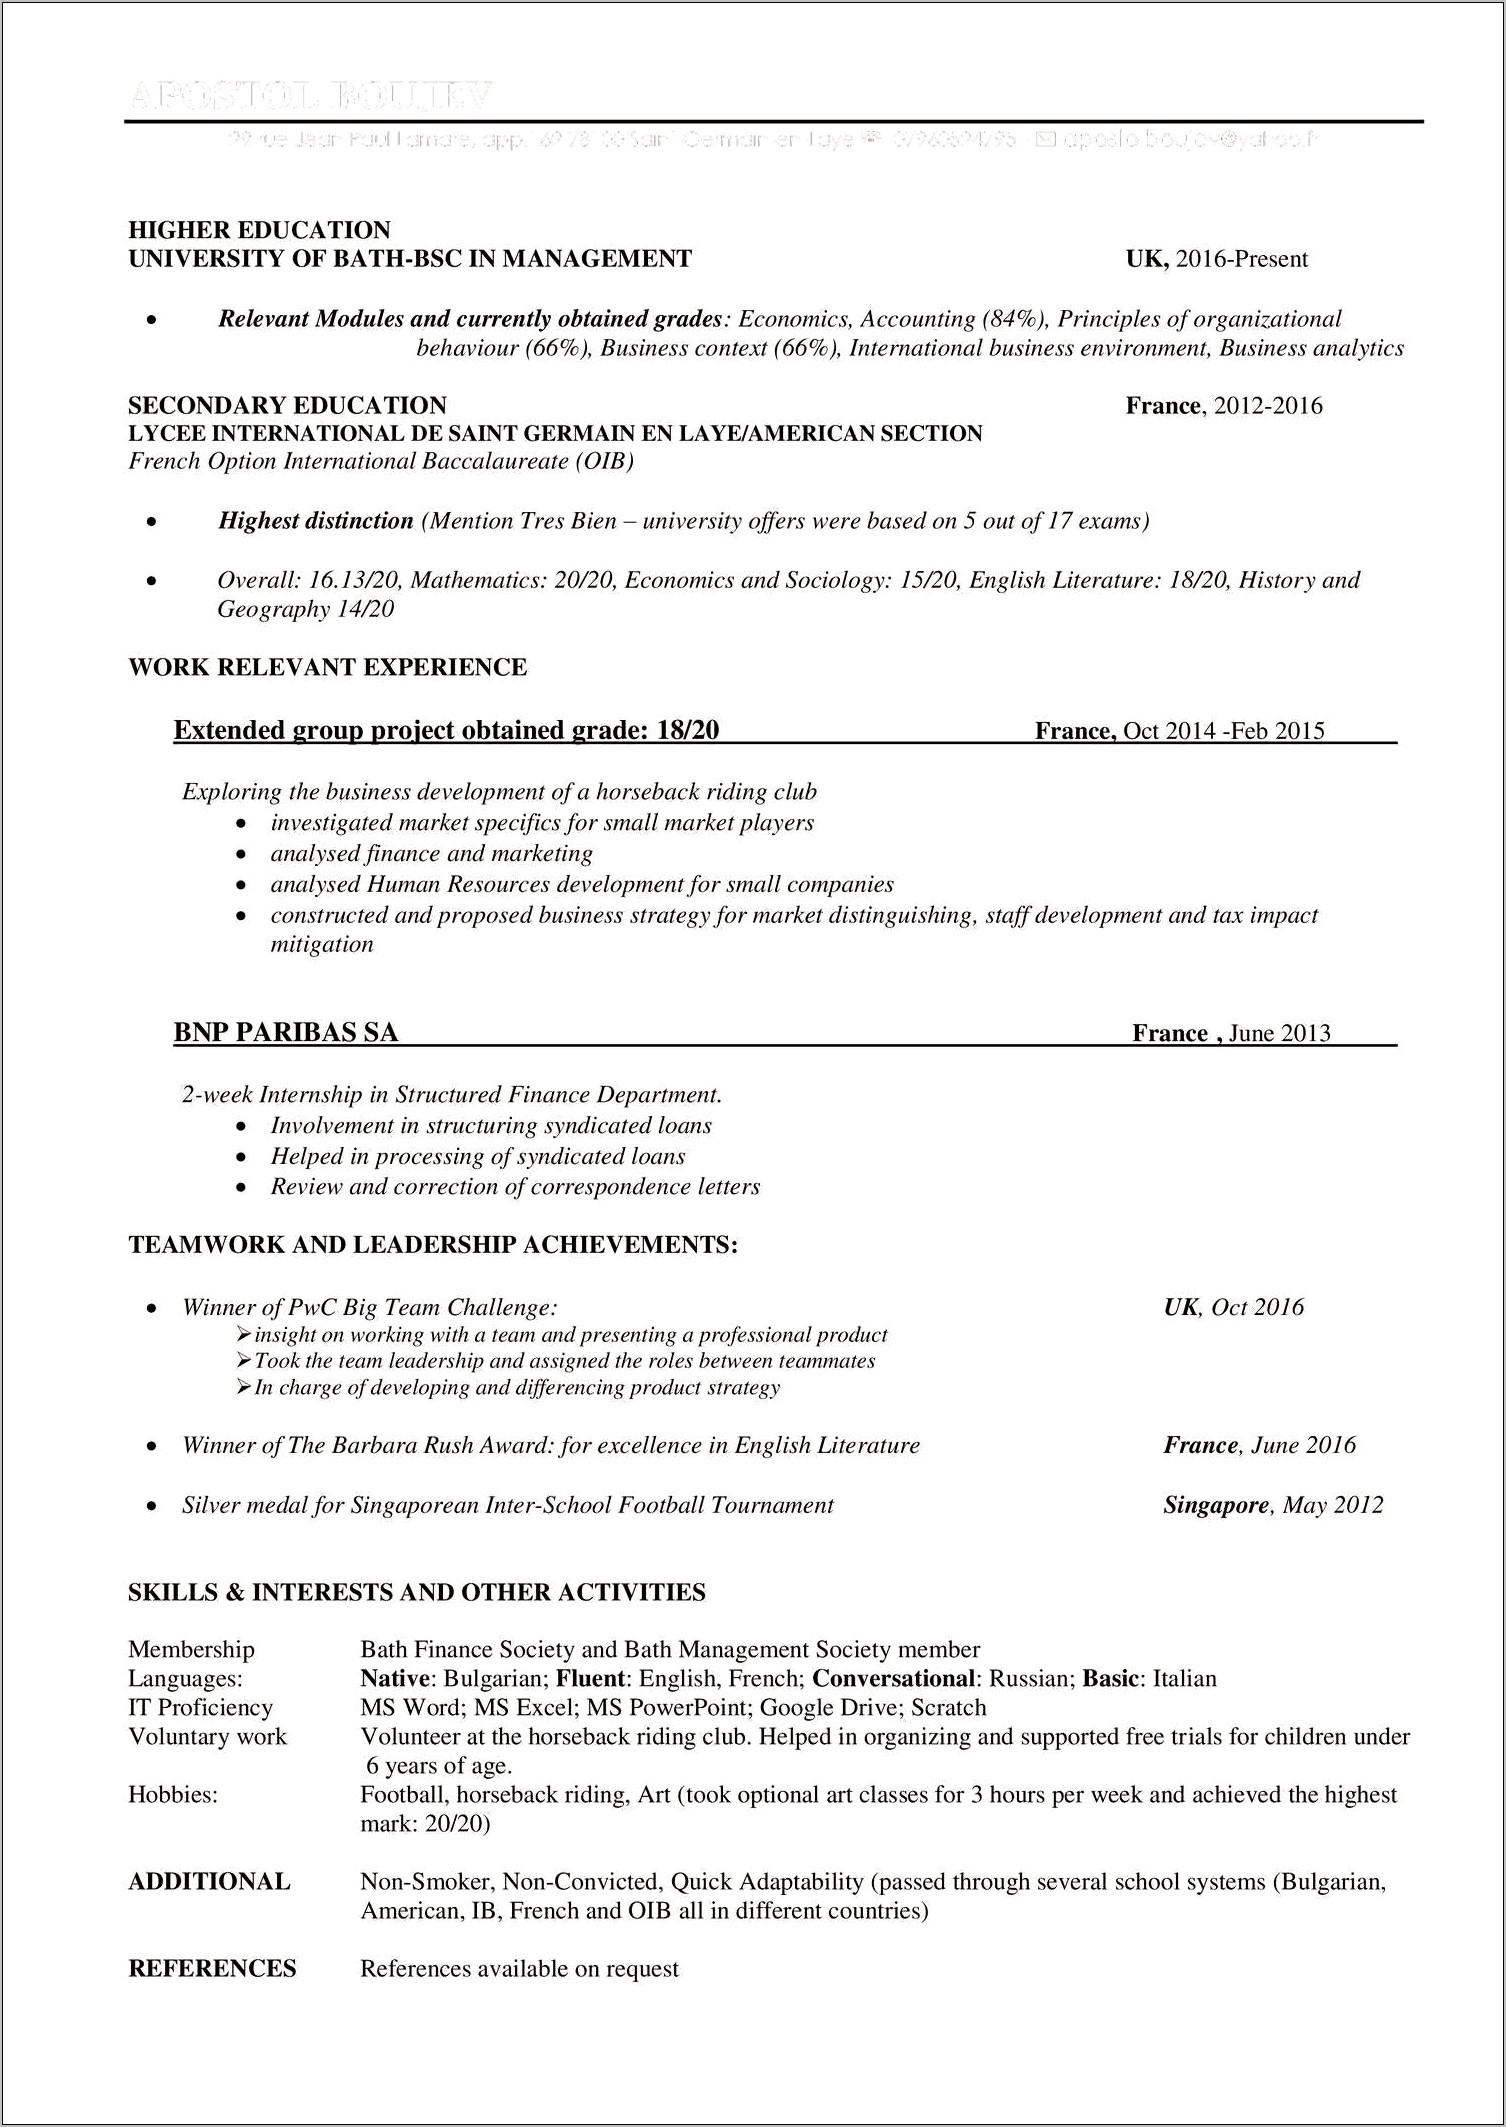 Resume For Auto Spring Marketing Manager